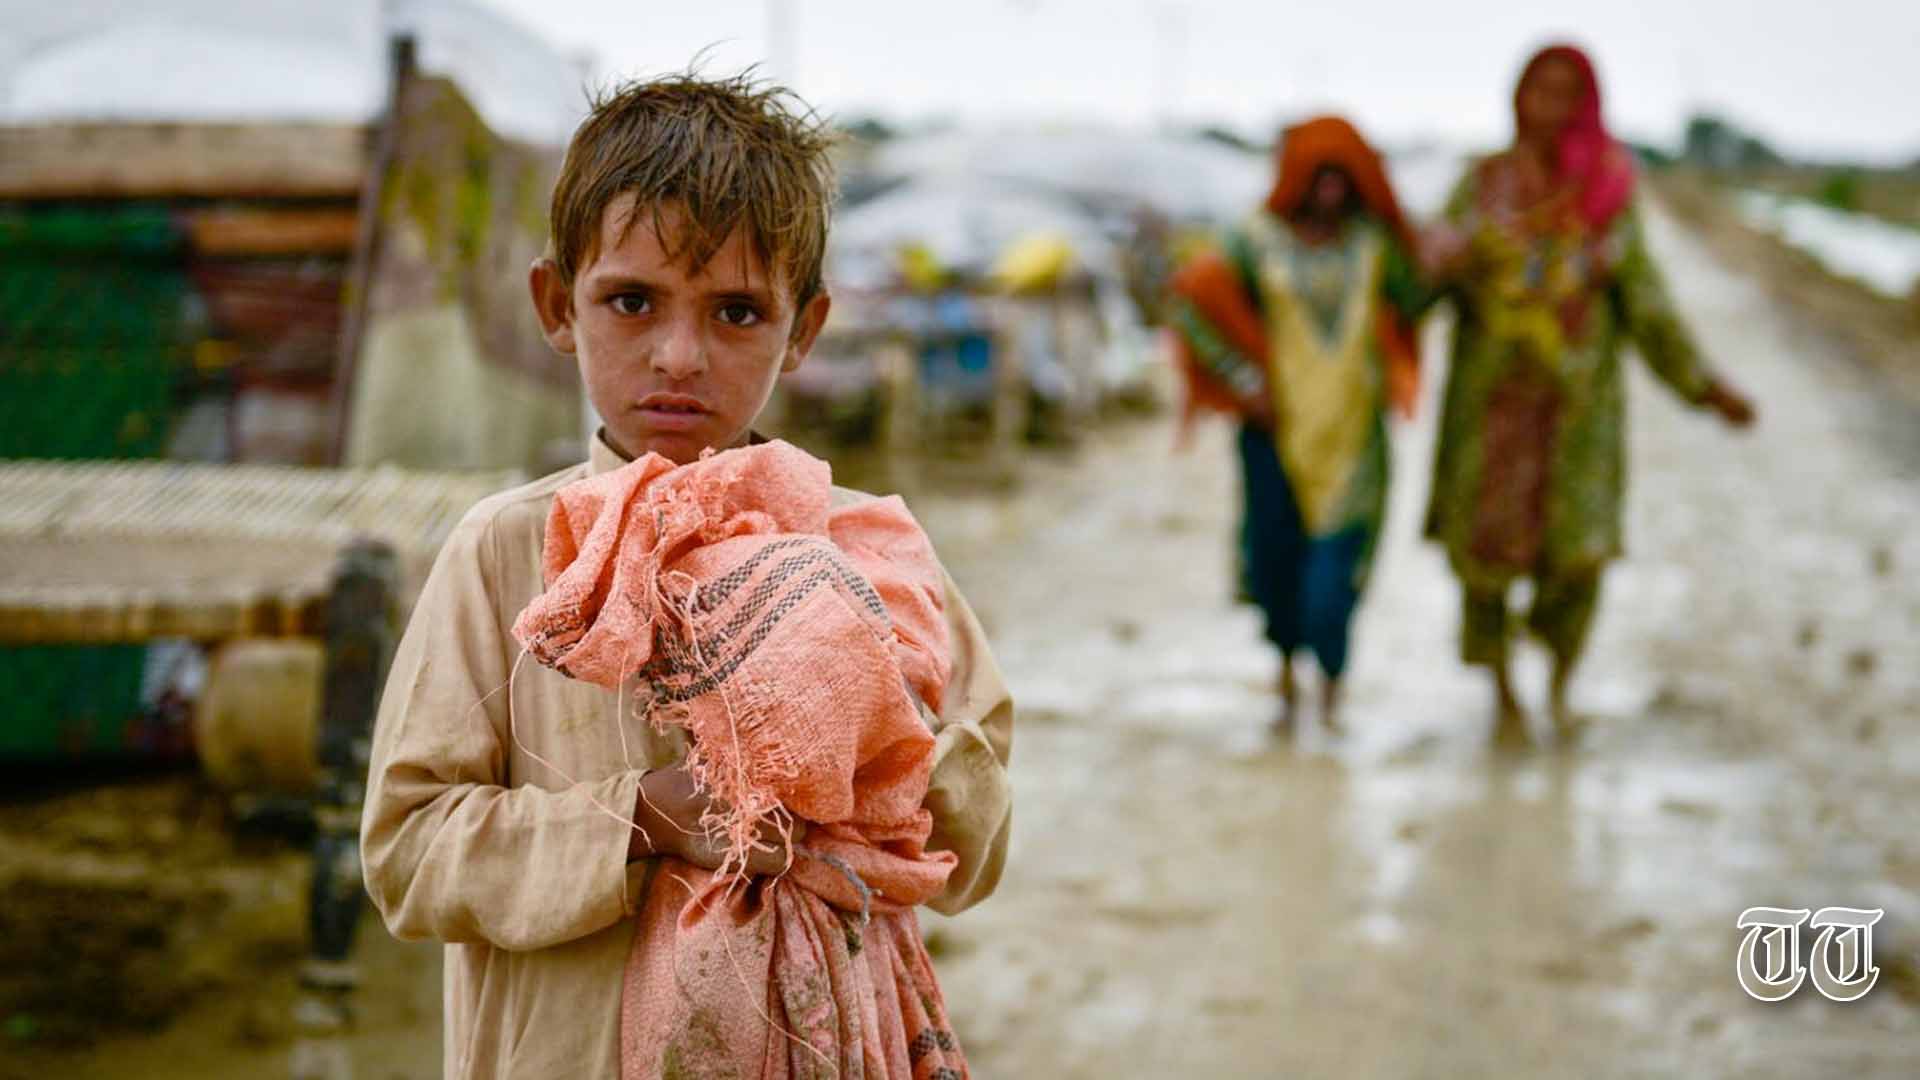 A file photo is shown of a Pakistani child amidst the aftermath of the 2022 floods.